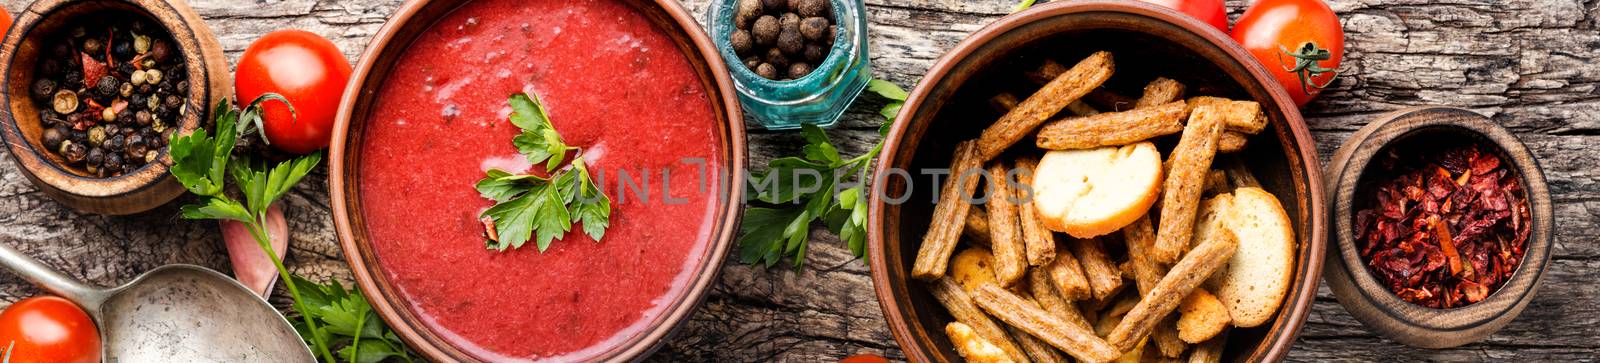 Bowl with fresh tomato soup on wooden table.Long banner